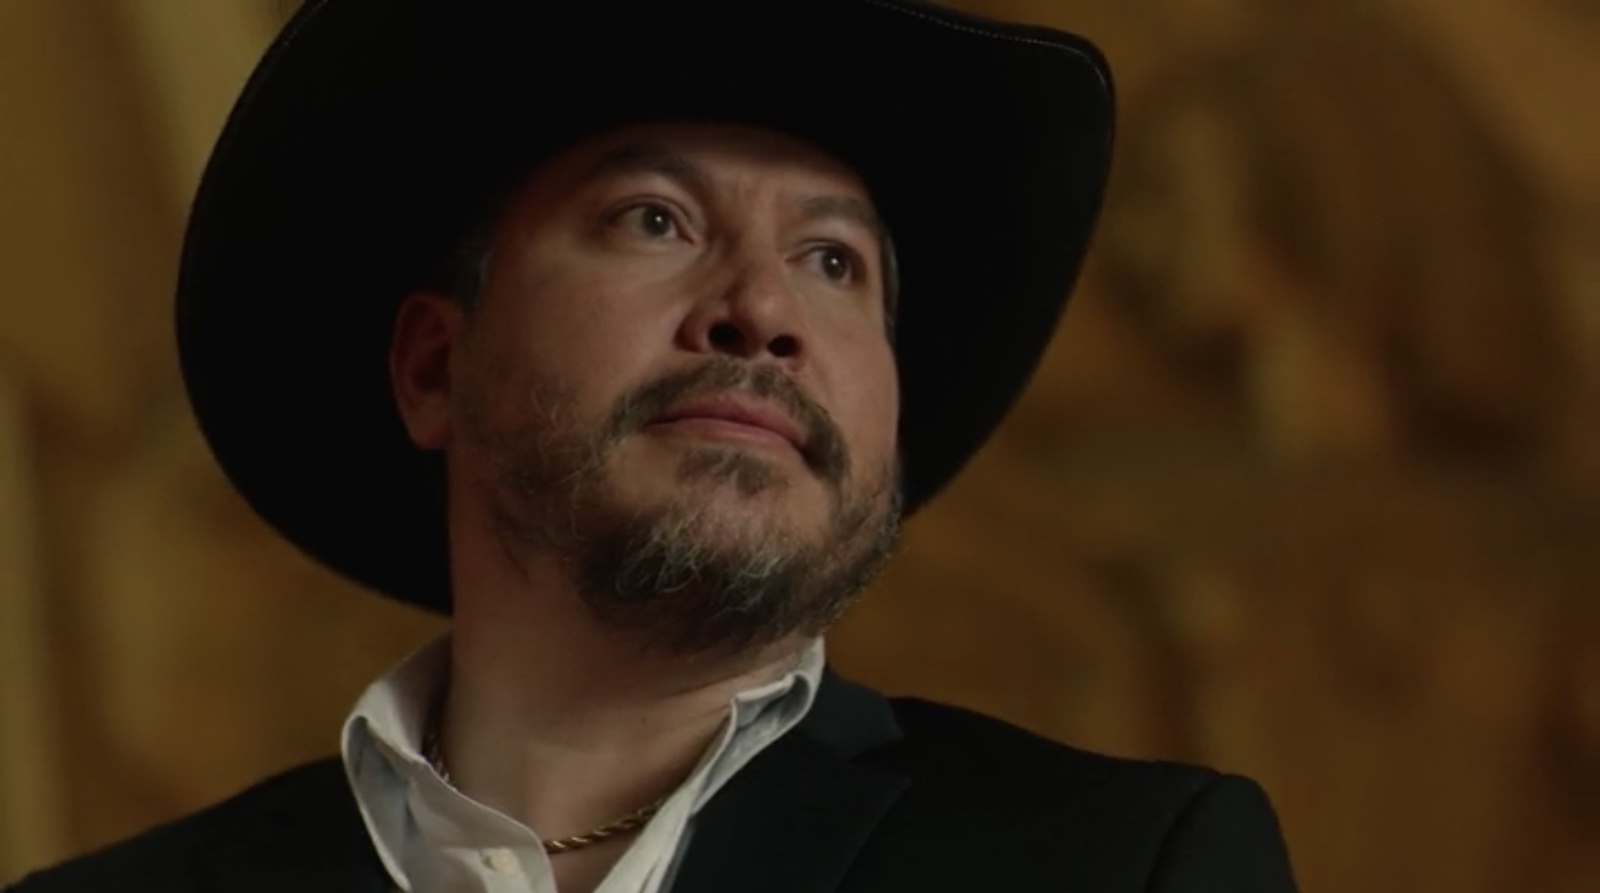 'Queen of the South' left us with our jaws open wide at the end of season 4. So what's next for Teresa Mendoza? Here's everything we know about season 5.